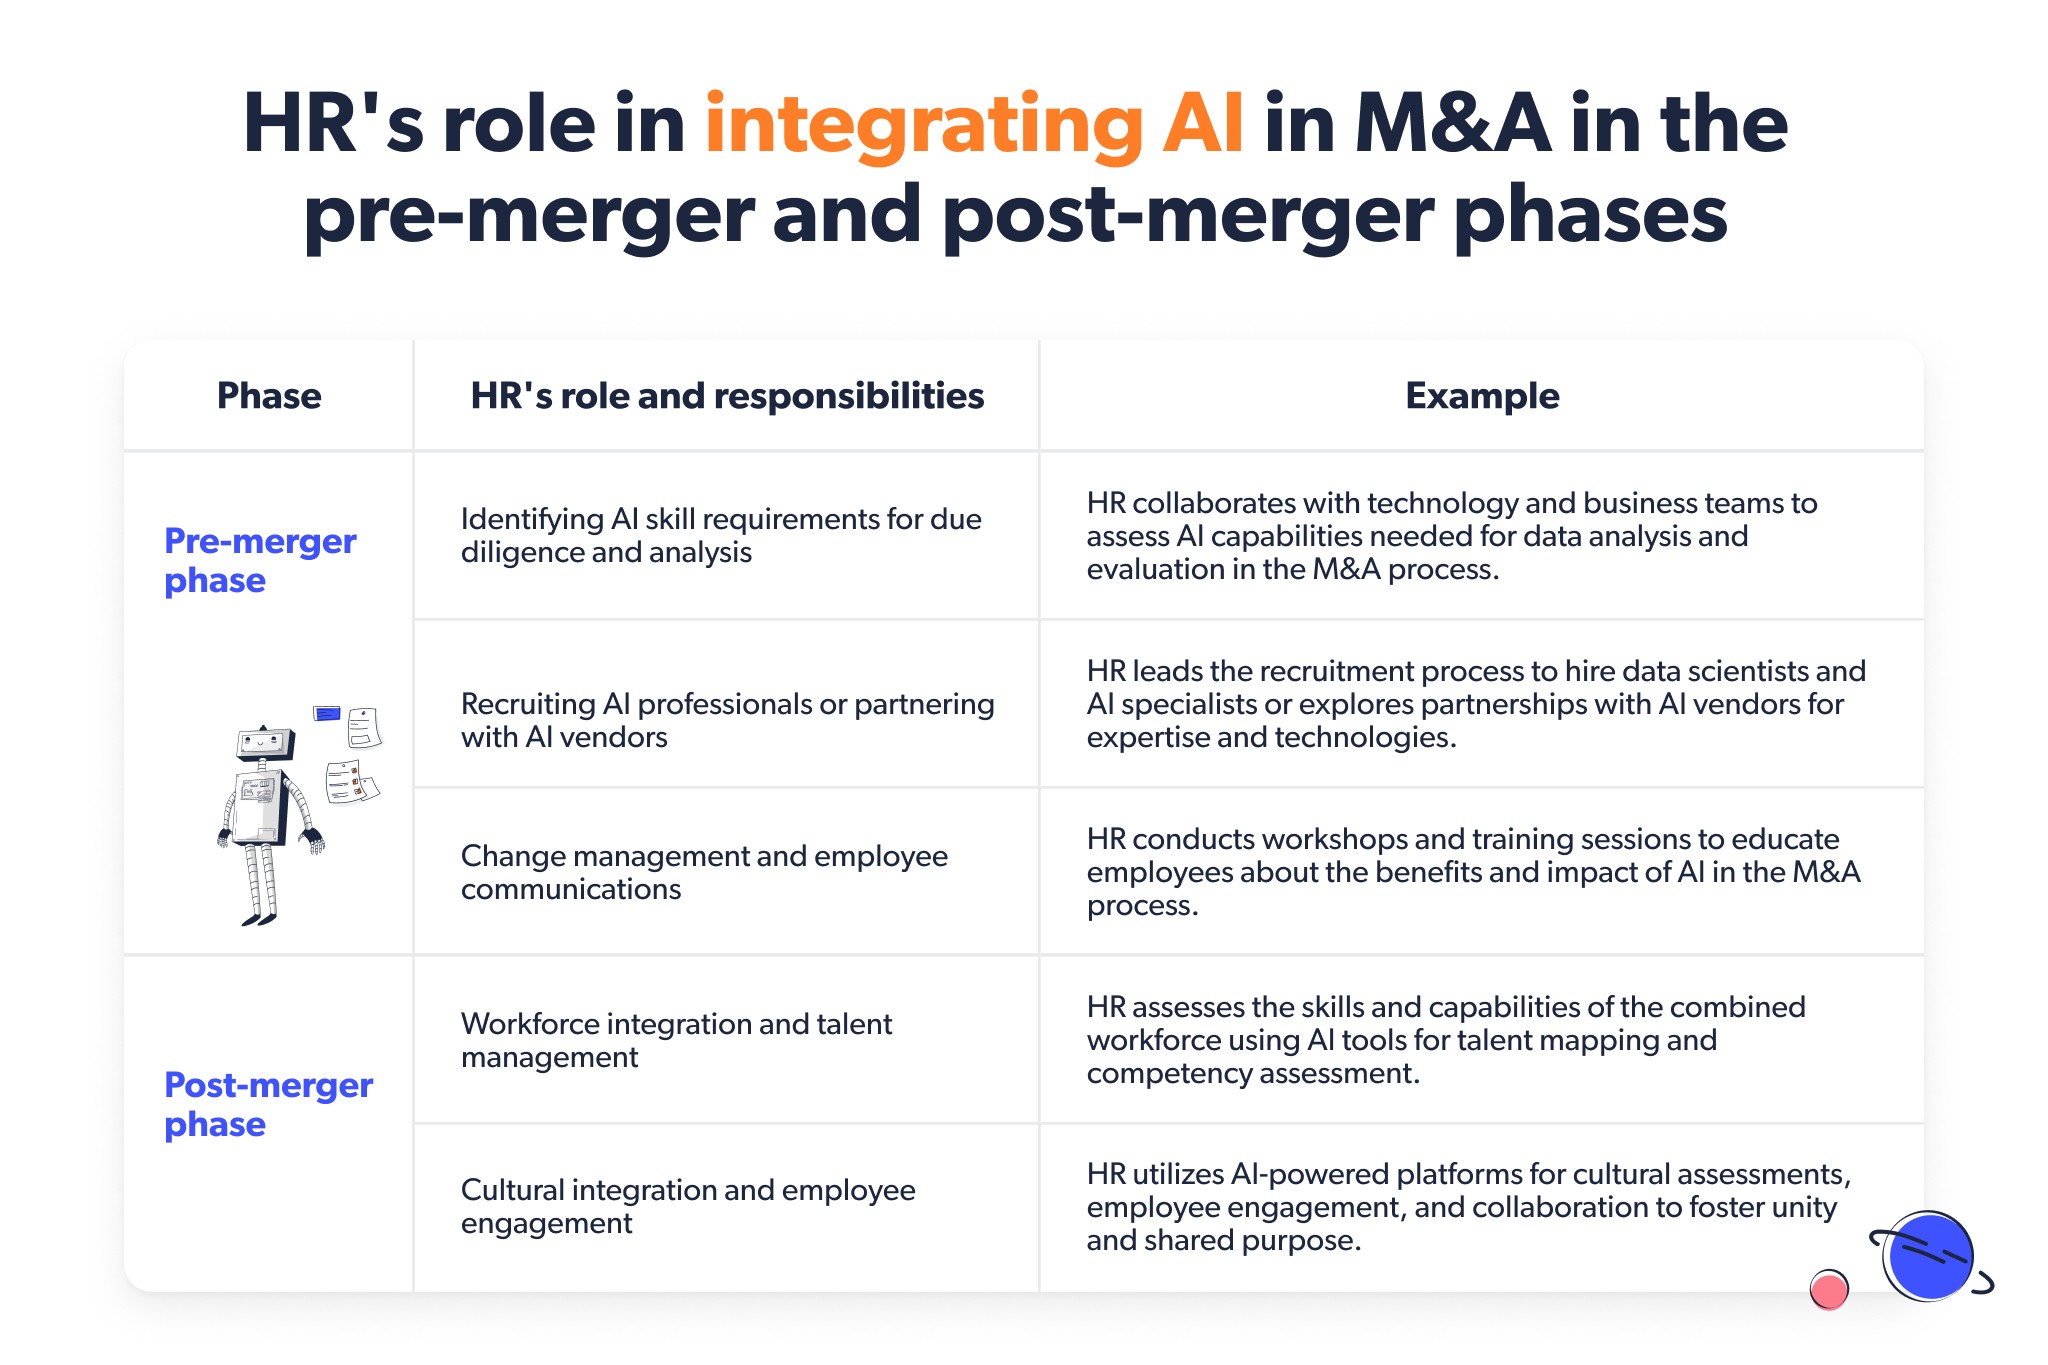 's role in the successful integration of AI in M&A